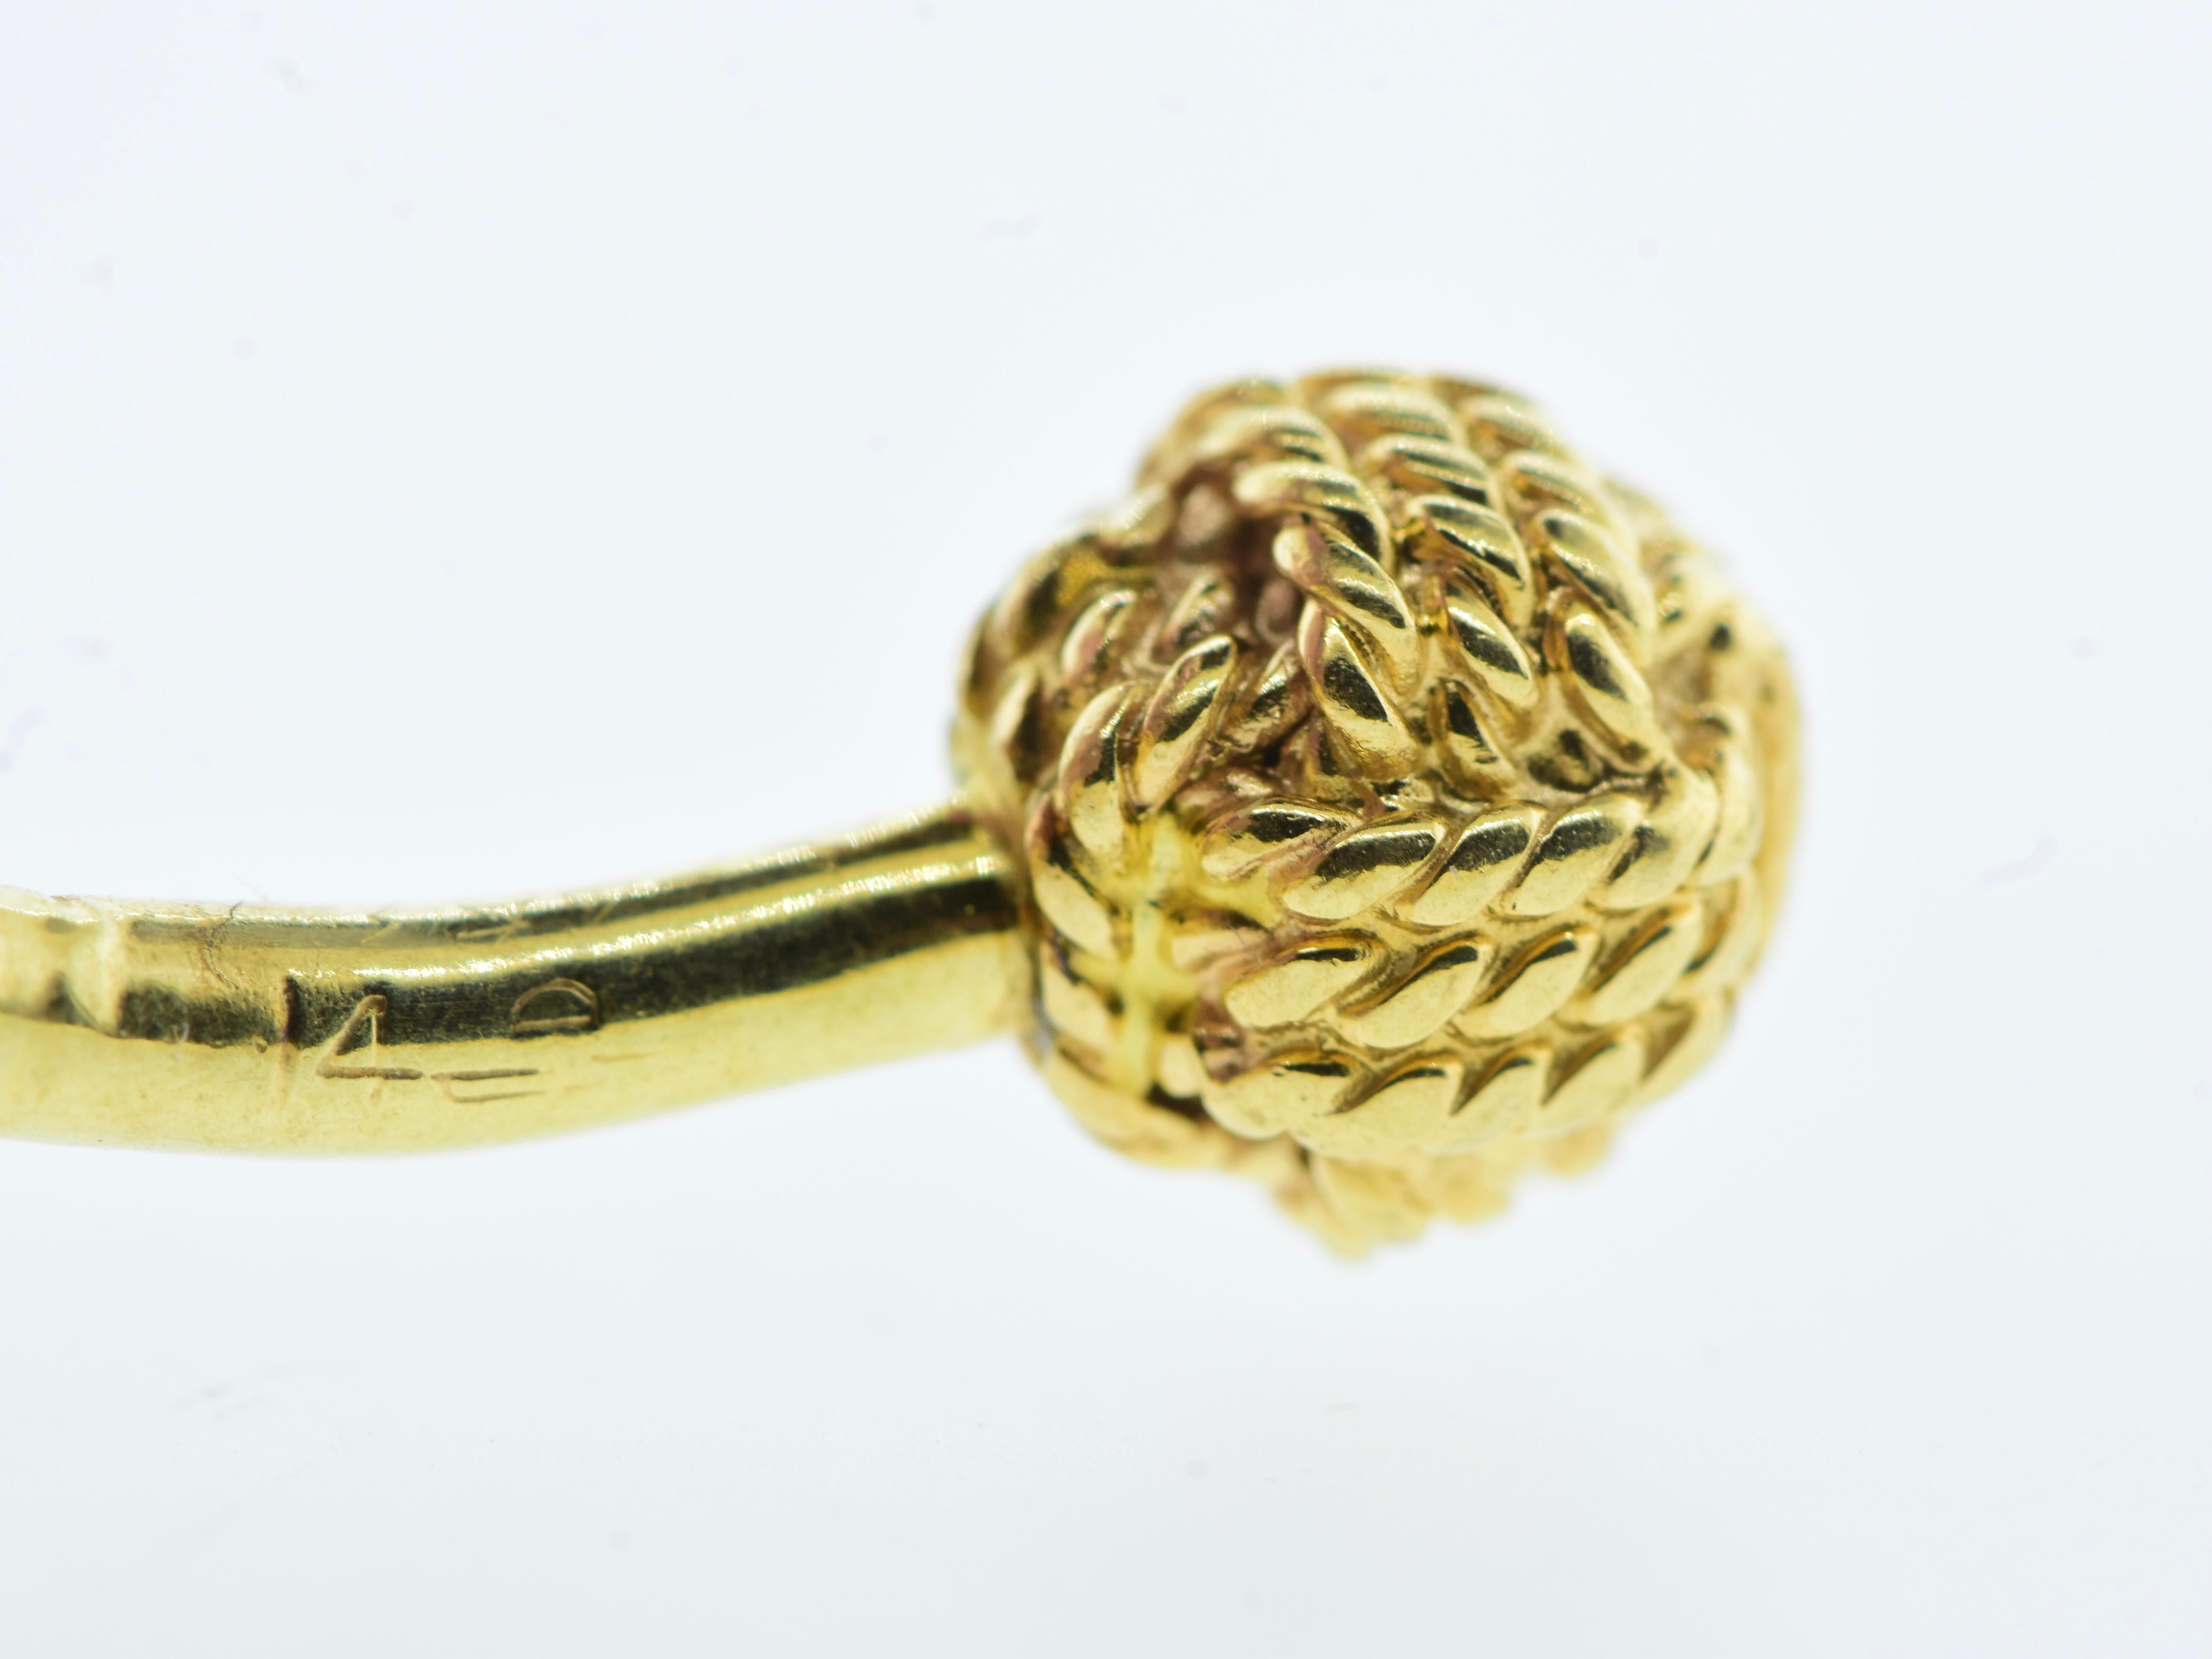 Tiffany & Co. Yellow Gold Cuff & Stud Set in a Love Knot Motif, Vintage, c. 1970 For Sale 1